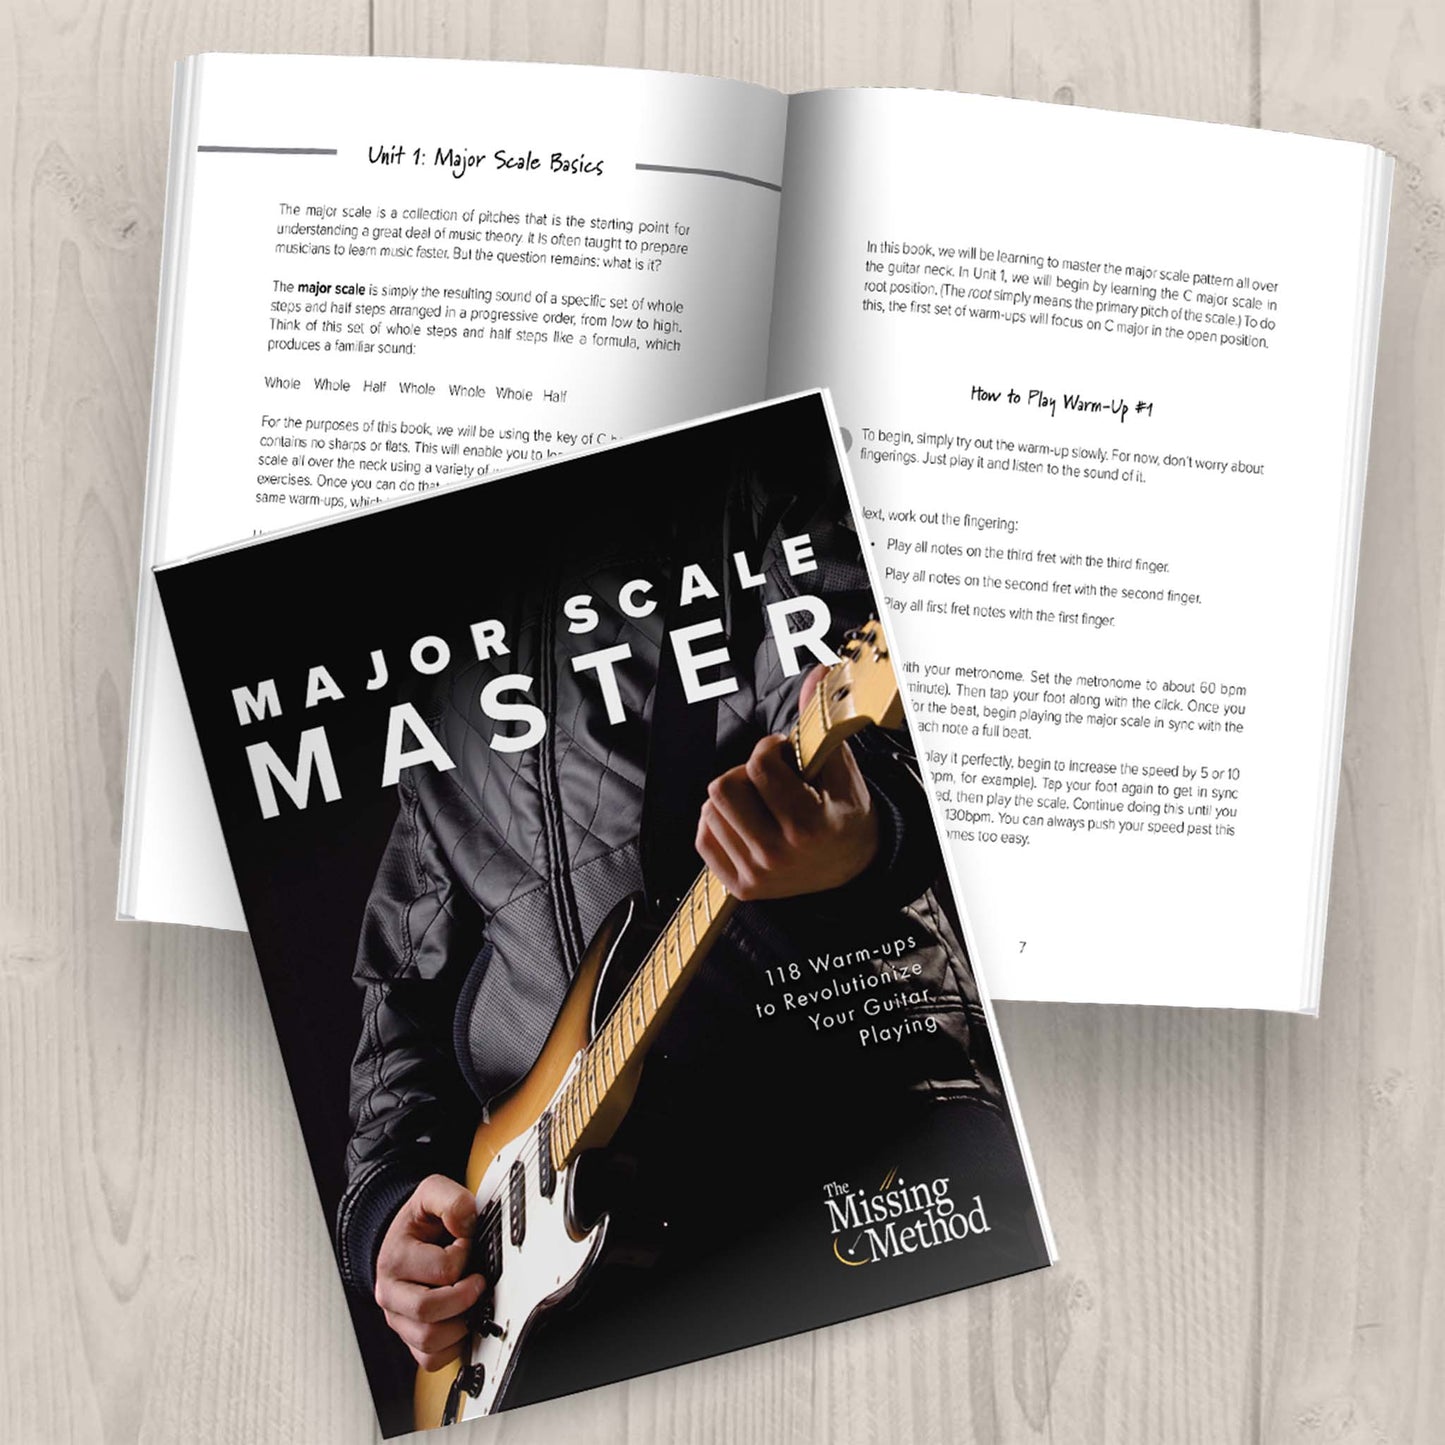 Major Scale Master from The Missing Method for Guitar. Image of two copies of the paperback book on a tabletop, one open displaying pages of the book, and the other closed, displaying the front cover.